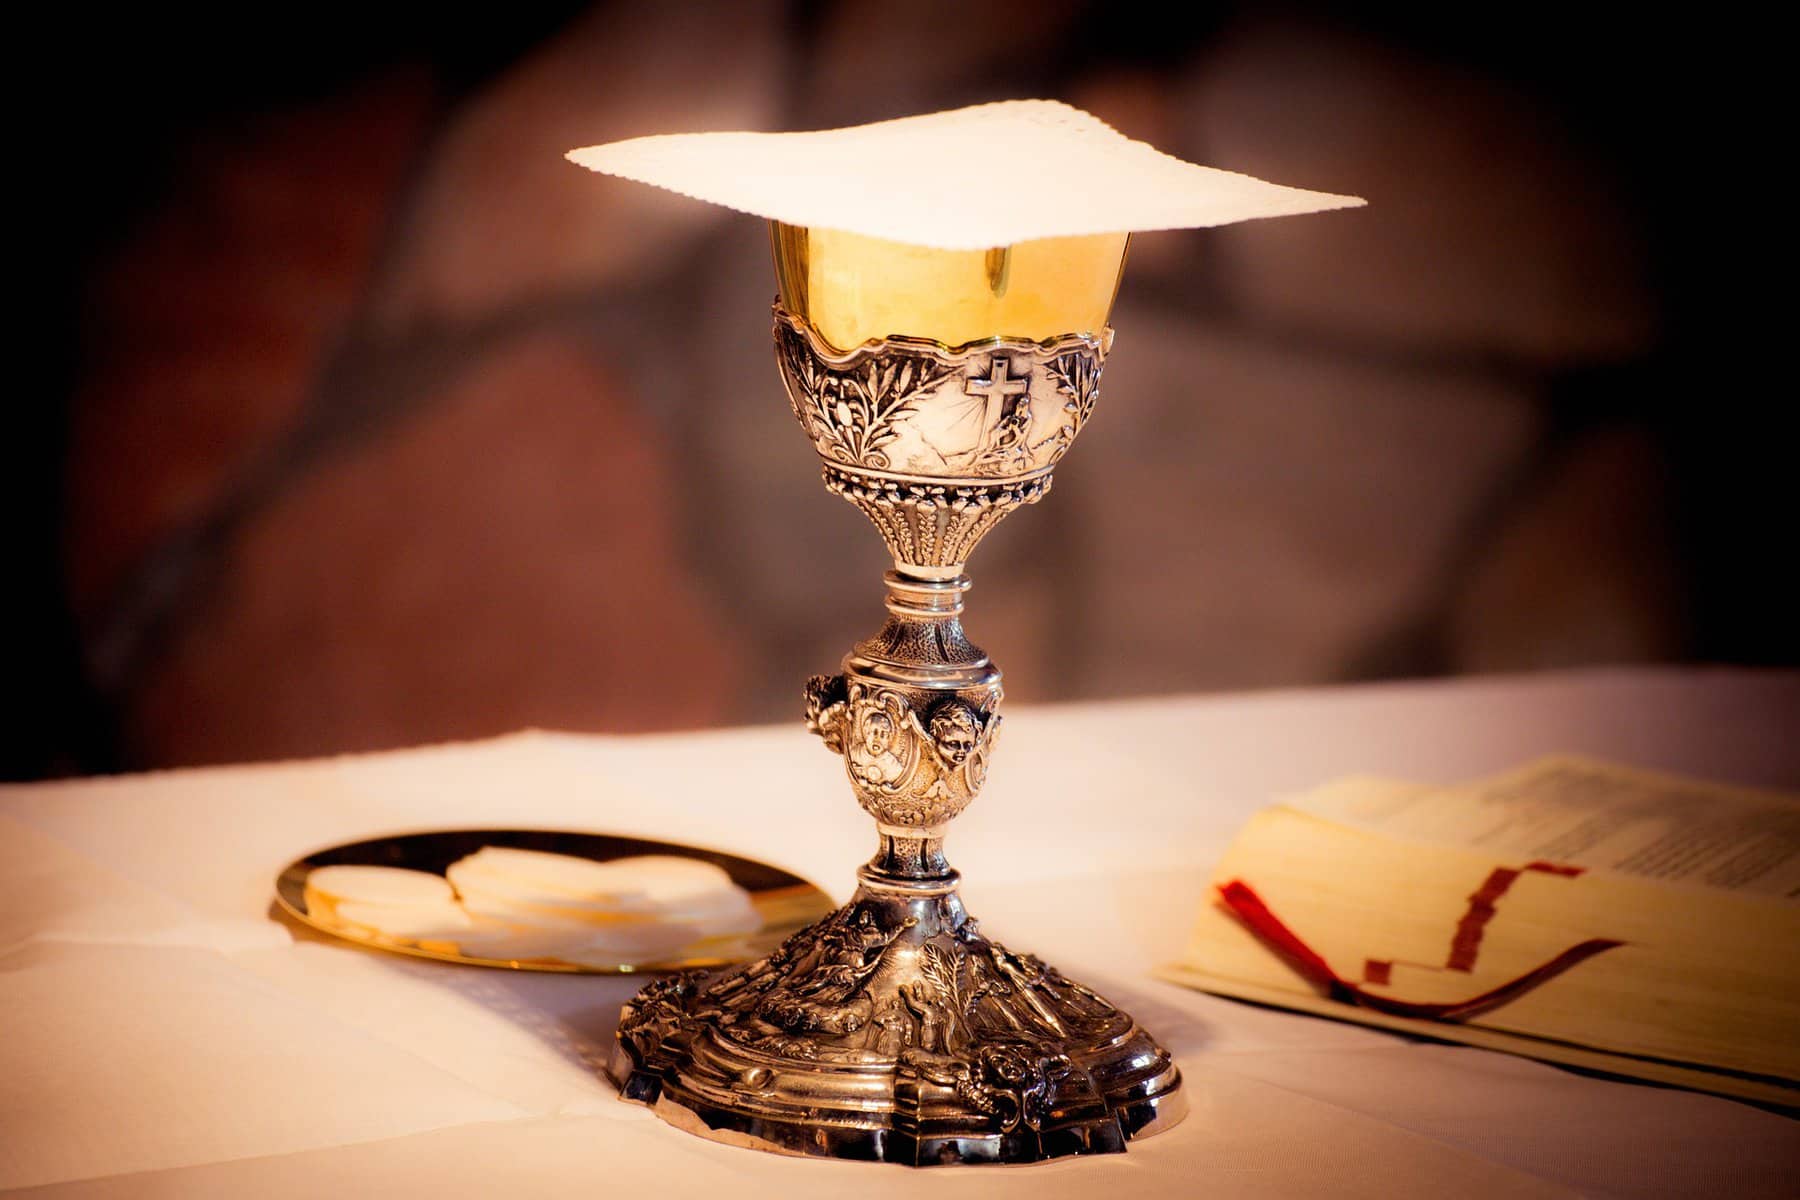 A silver and gold engraved communion chalice sits on an altar with communion wafers sitting behind it on a small plate.